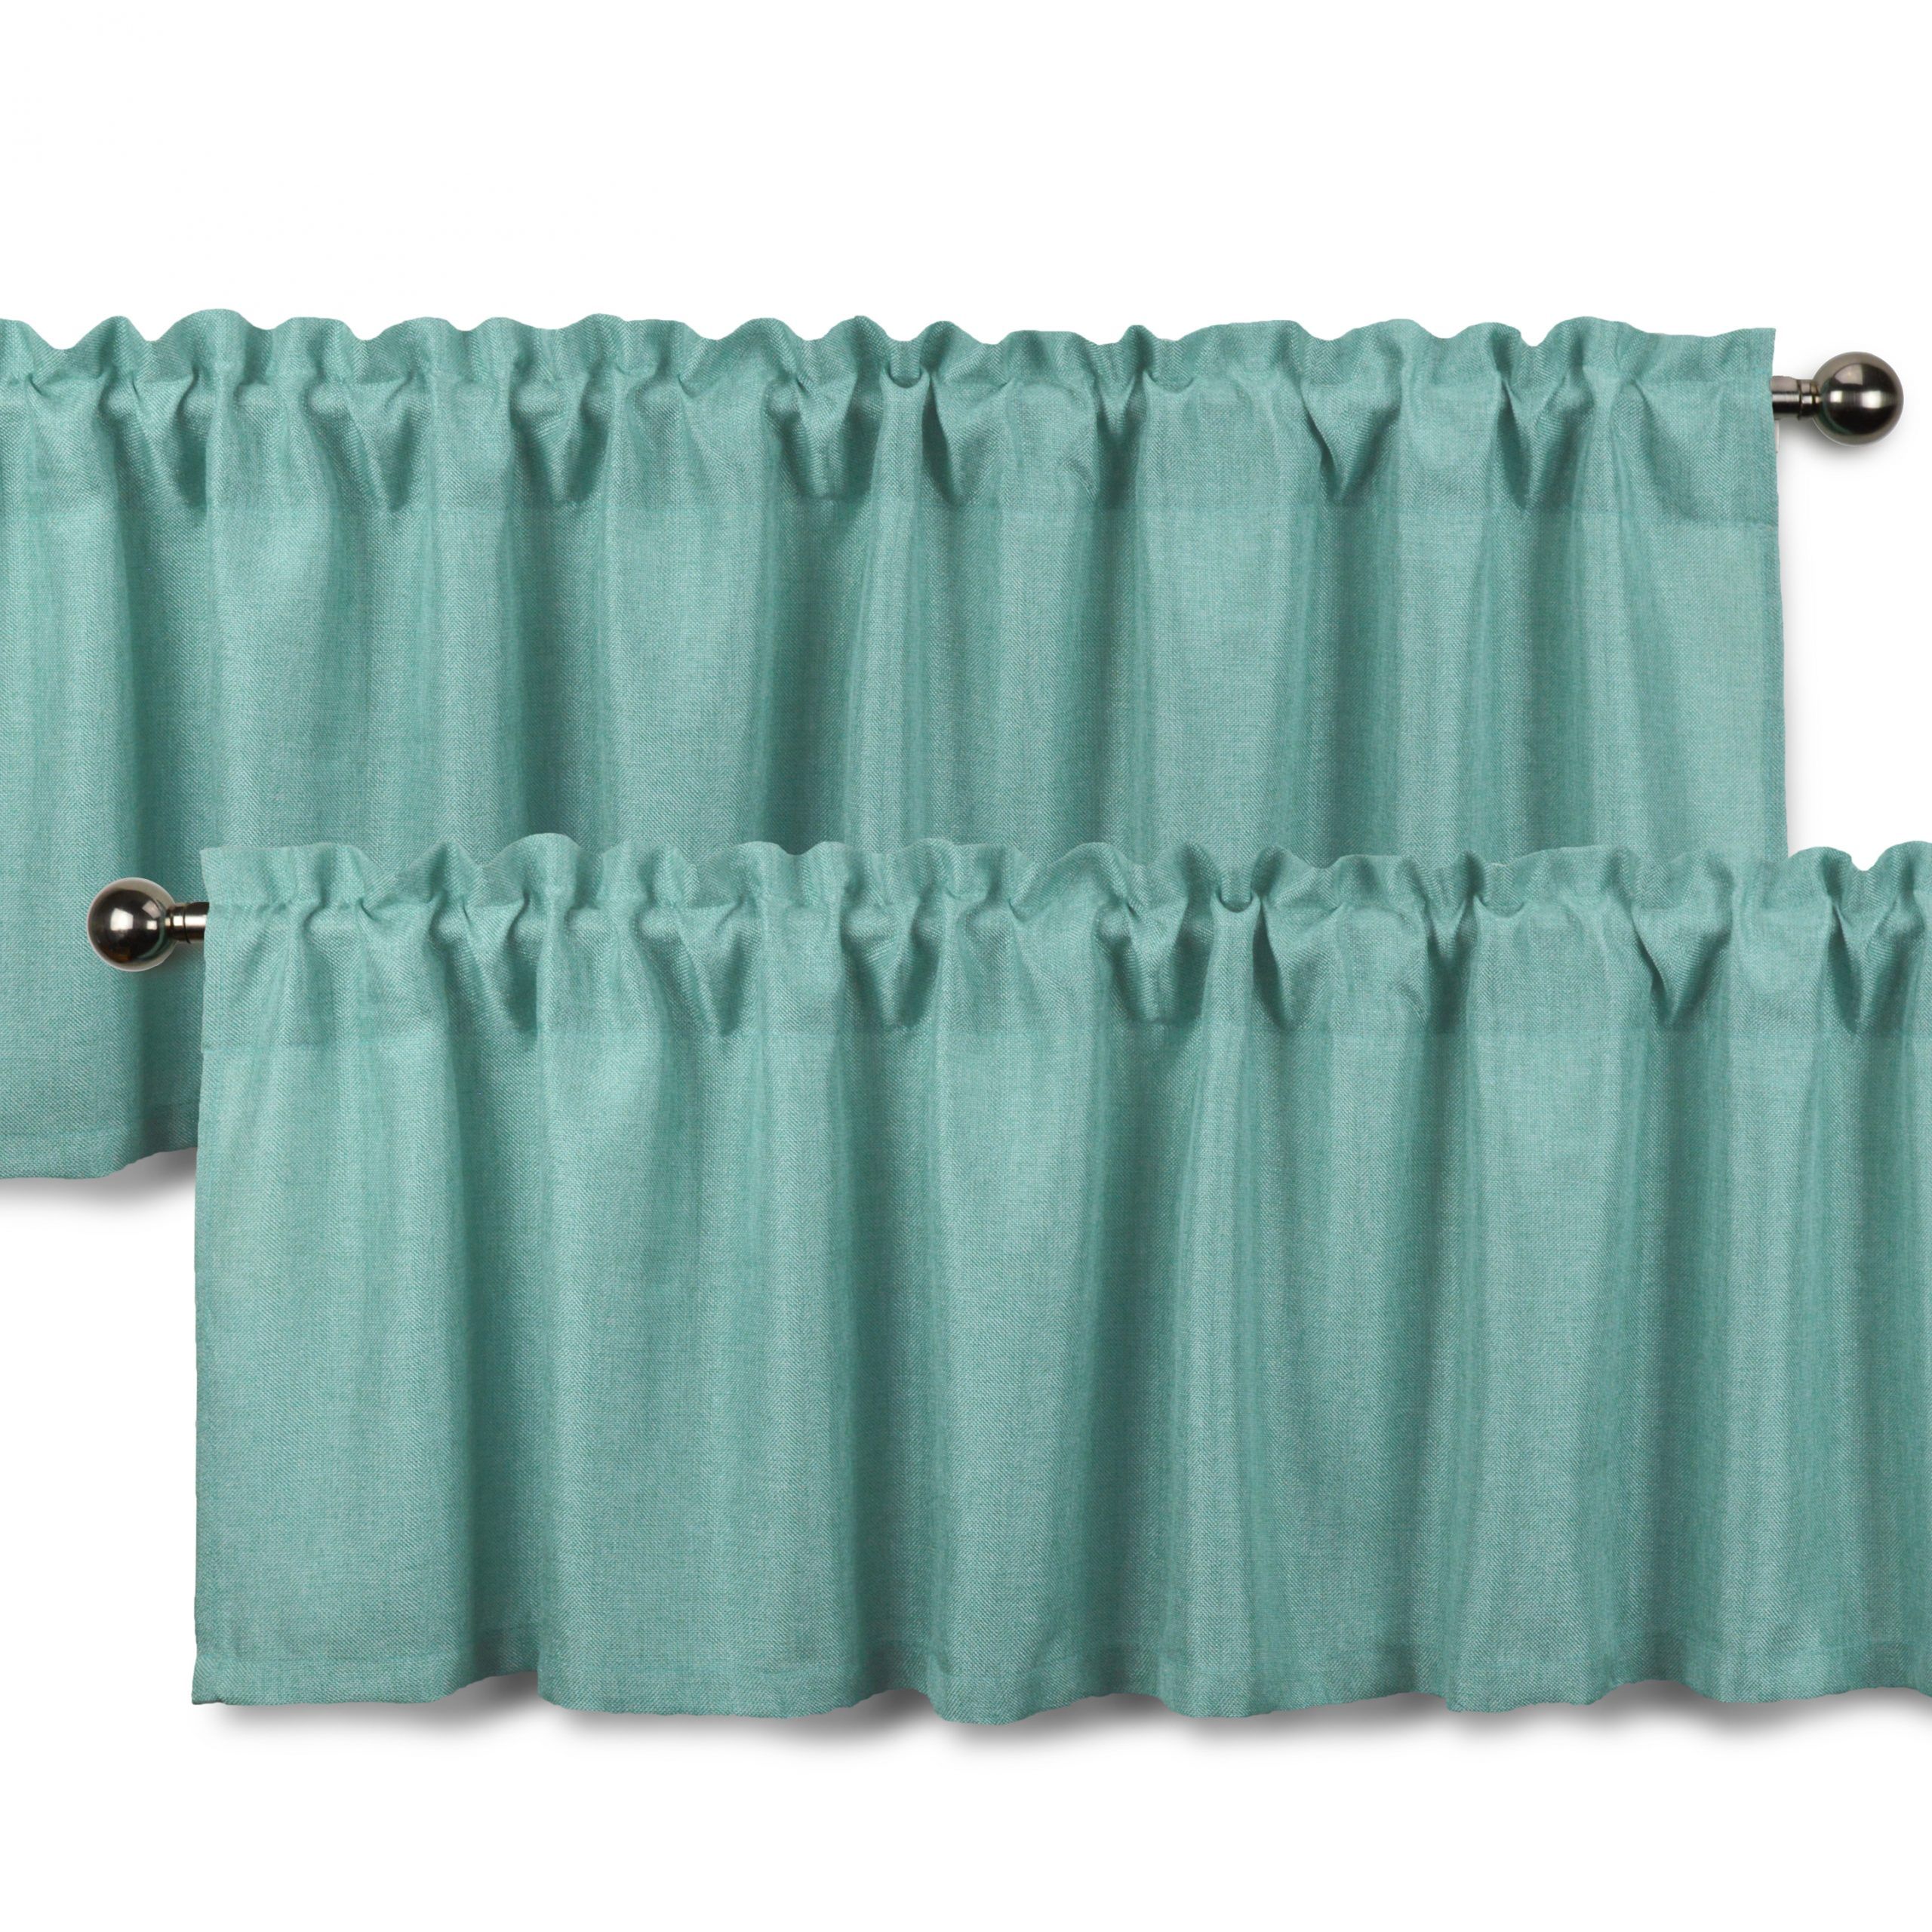 Aiking Home Rod Pocket Faux Linen Textured Semi Sheer Window In Semi Sheer Rod Pocket Kitchen Curtain Valance And Tiers Sets (View 15 of 20)